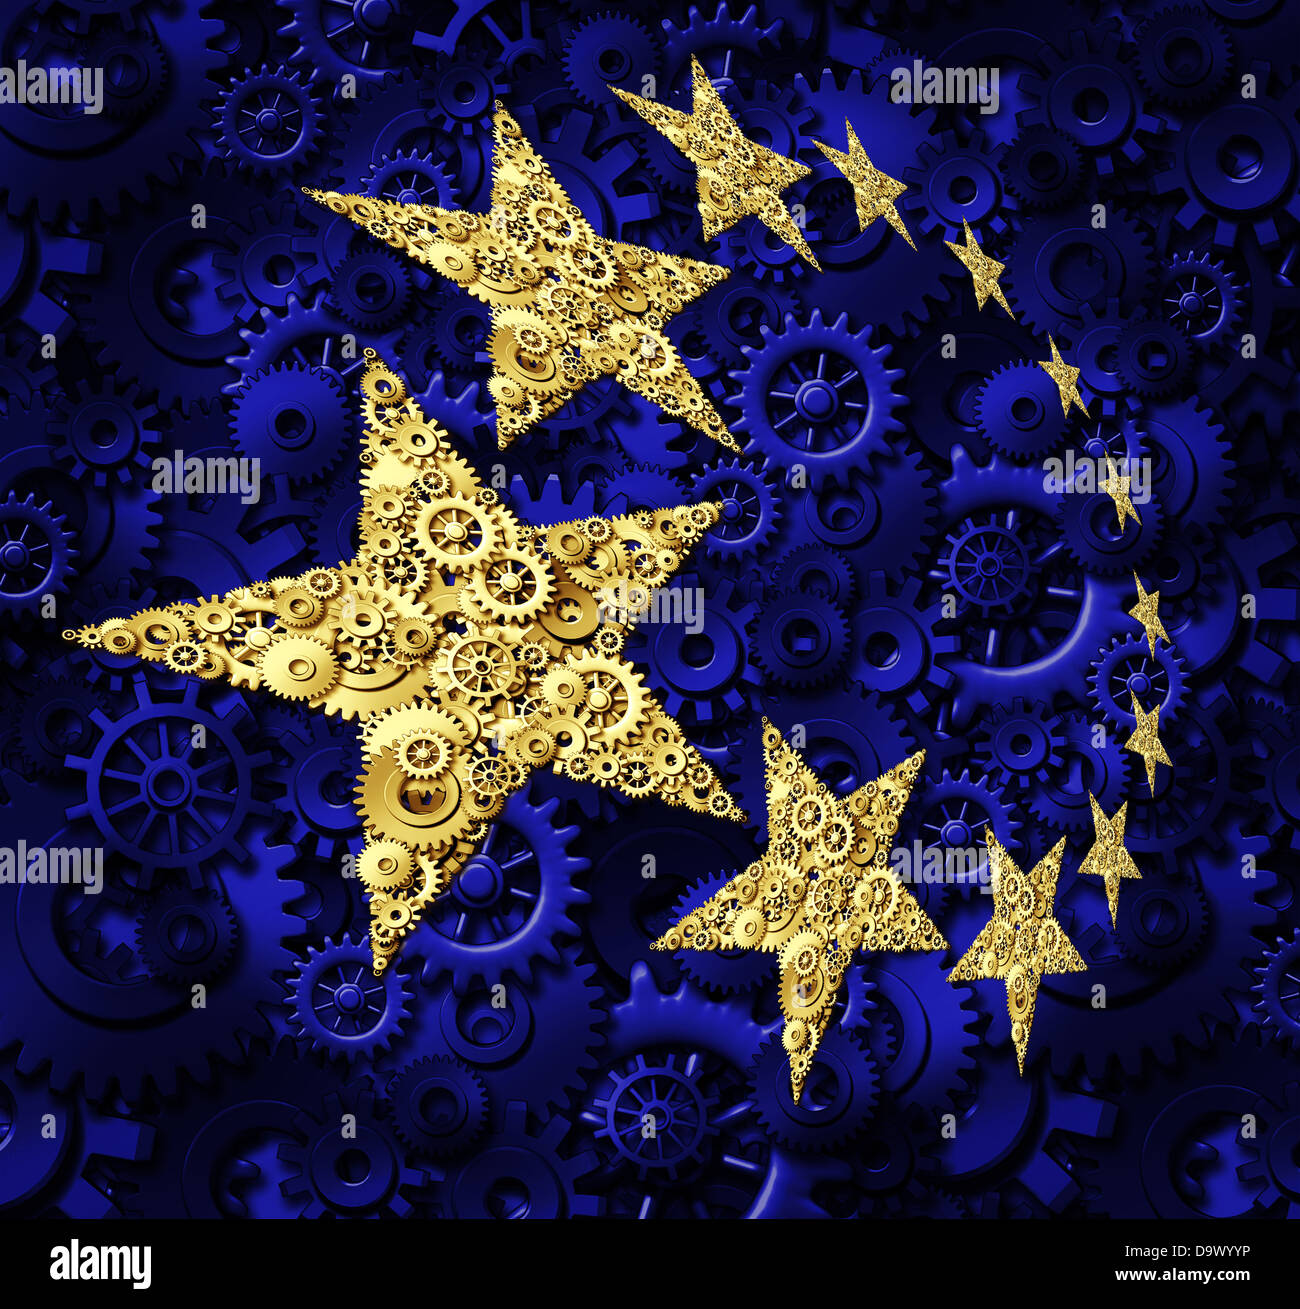 Europe industry and European Union economy business concept with a blue flag and yellow gold stars made of gears and cogs as a symbol of a working connected network from Germany France Italy and United Kingdom. Stock Photo